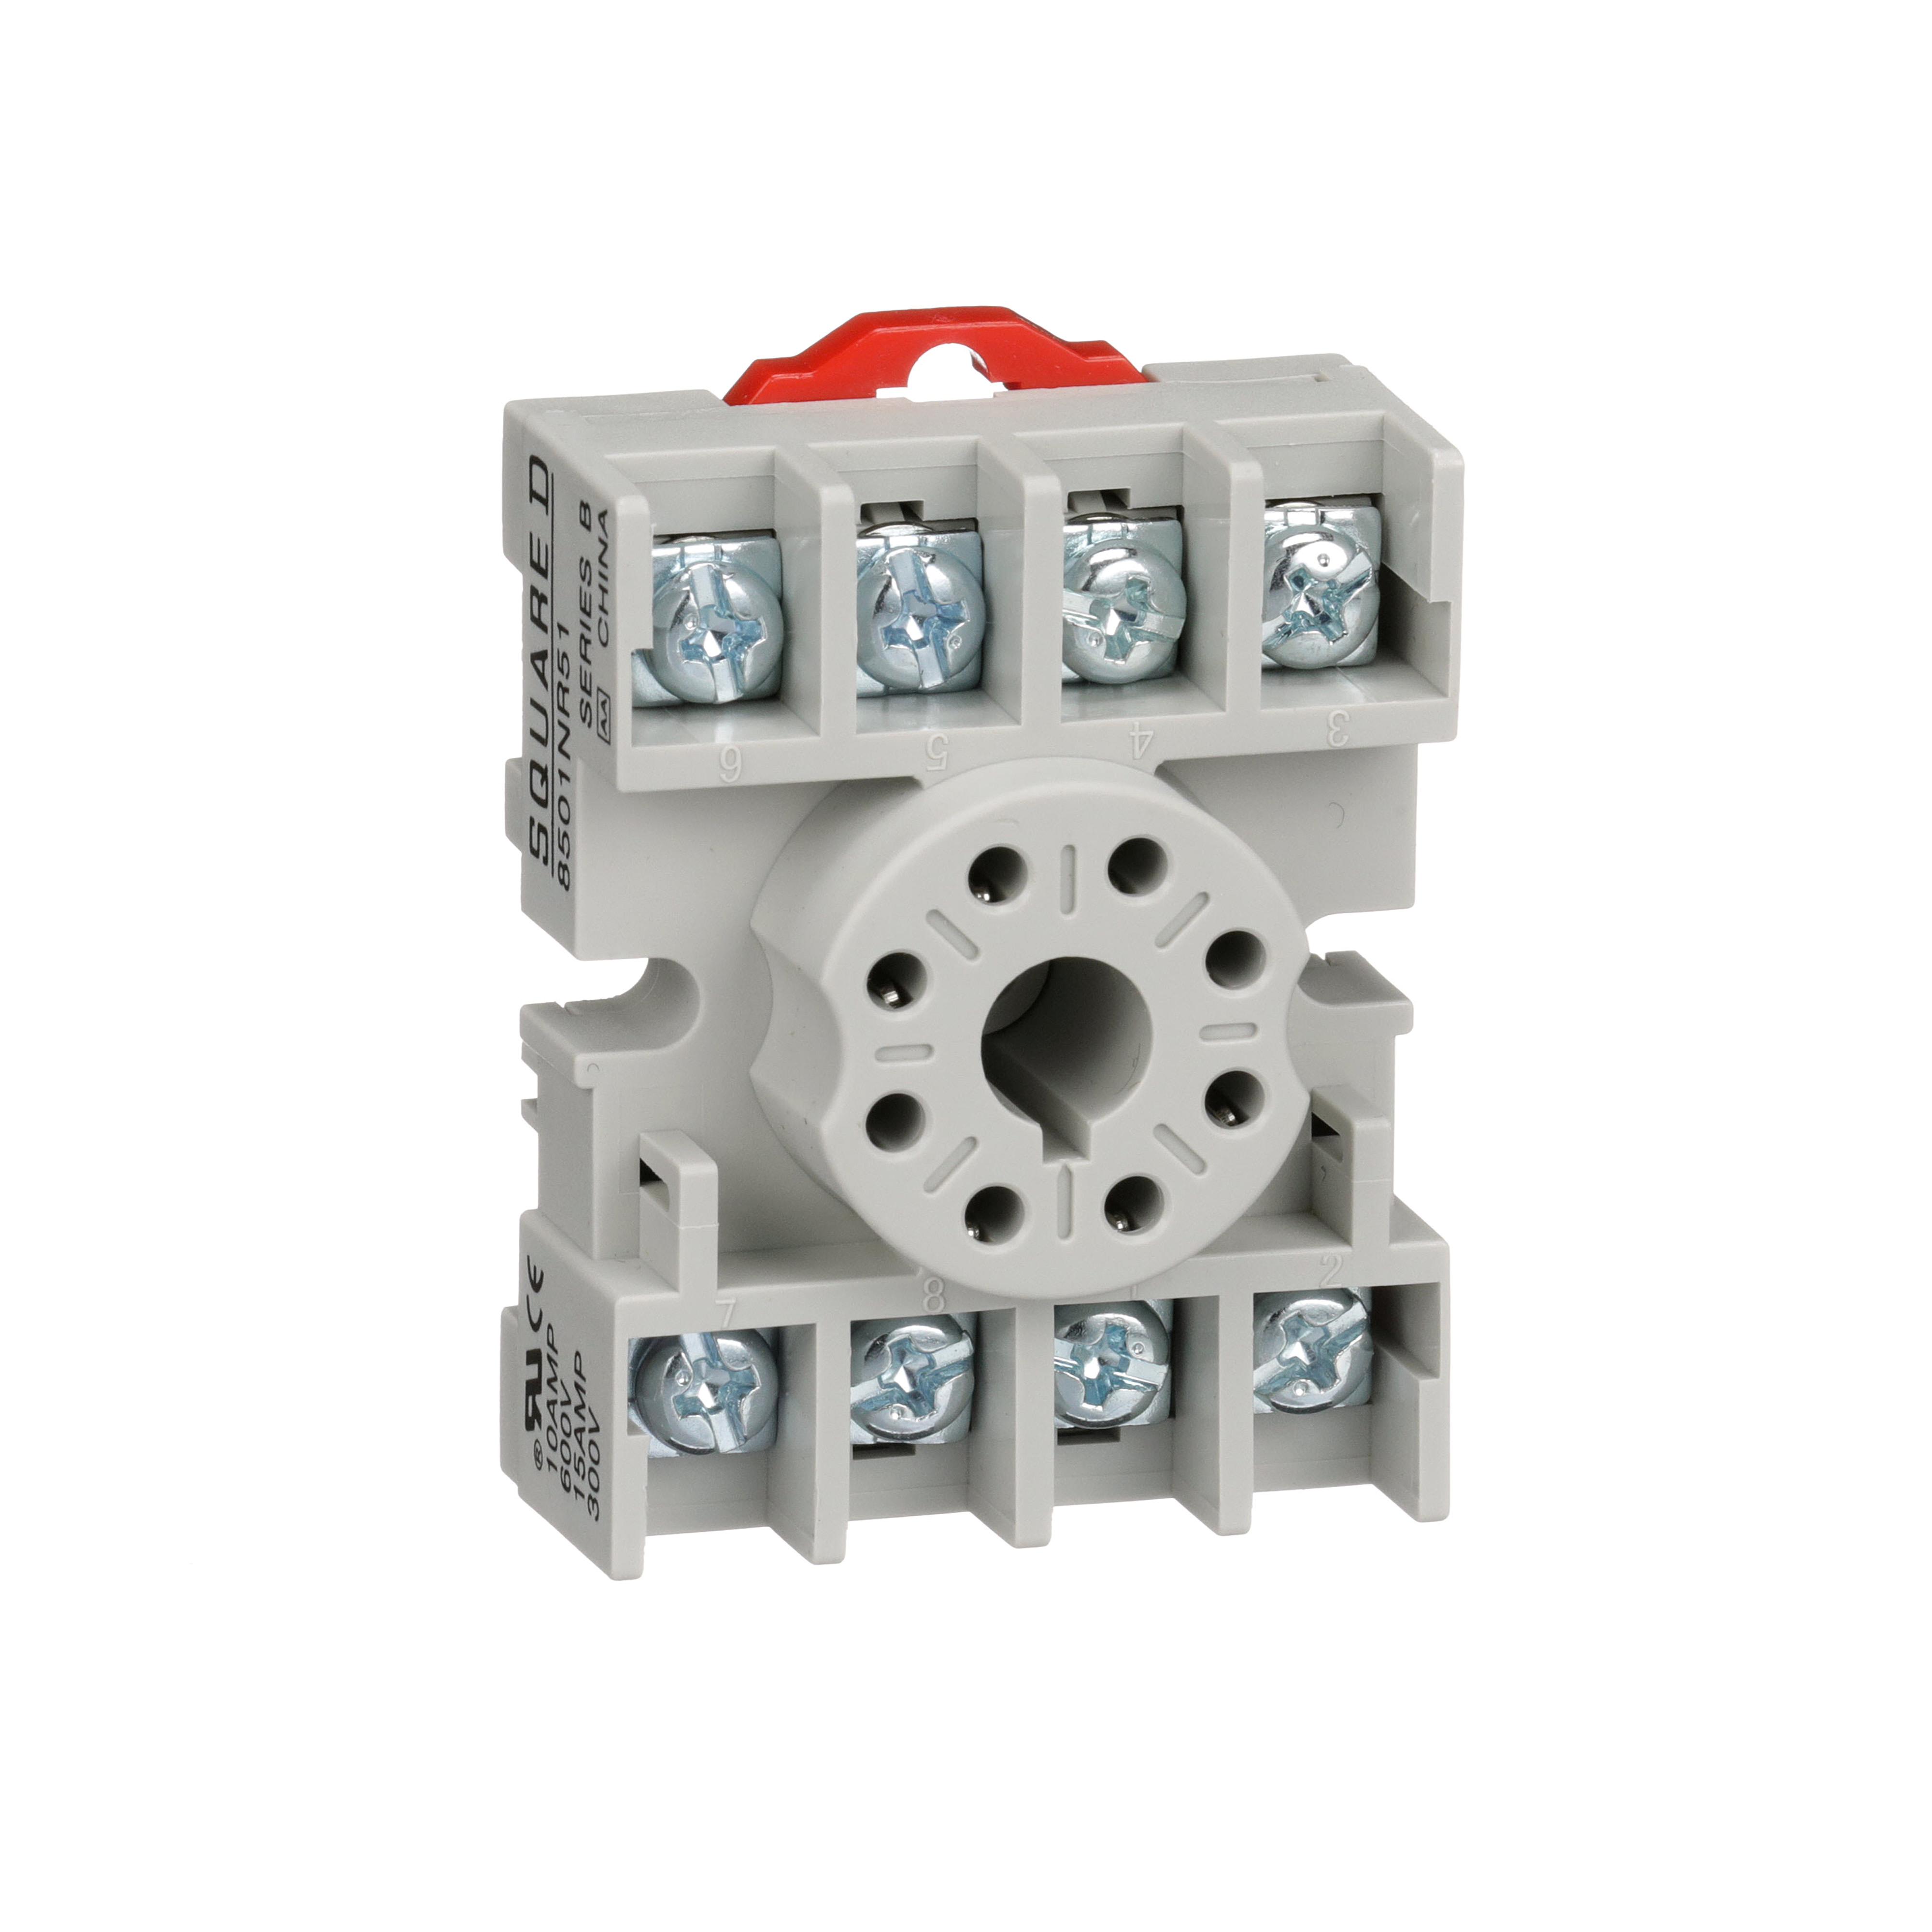 Plug in relay, Type N, relay socket, 8 tubular pin, single tier, for 8510KP relays and 9050JCK timers, bulk packaged